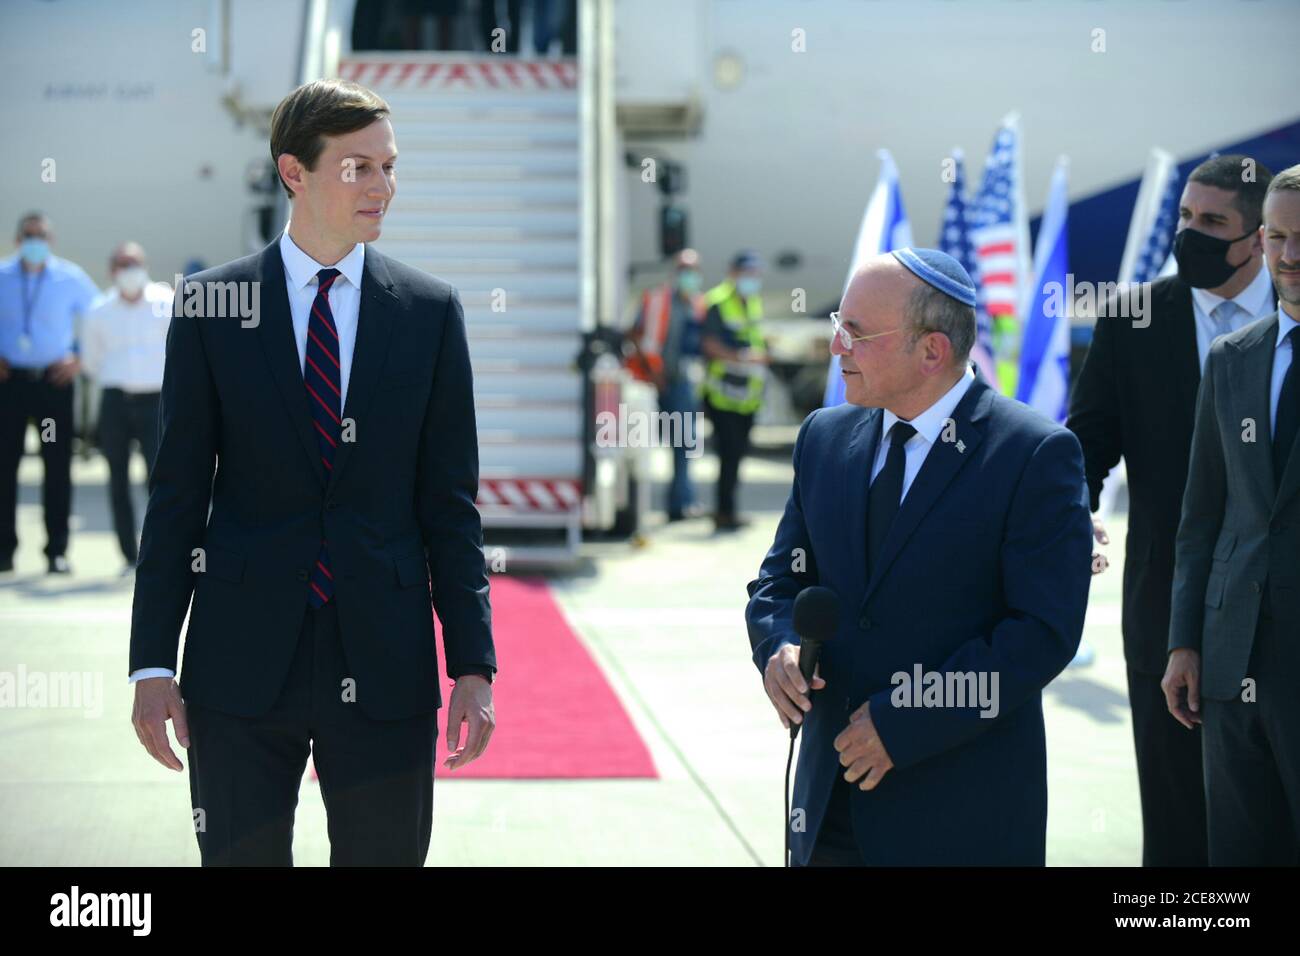 Lod, Israel . 31st August, 2020. Israel's chief of National Security Council Meir Ben Shabbat (R) and Senior U.S. Presidential Advisor Jared Kushner are seen together before their departure to United Arab Emirates (UAE) at Ben Gurion International Airport near central Israeli city of Tel Aviv on Aug. 31, 2020. An Israeli delegation, joined by senior U.S. officials, departed from Tel Aviv on Monday to Abu Dhabi in Israel's first commercial flight to the United Arab Emirates. Credit: Xinhua/Alamy Live News Stock Photo